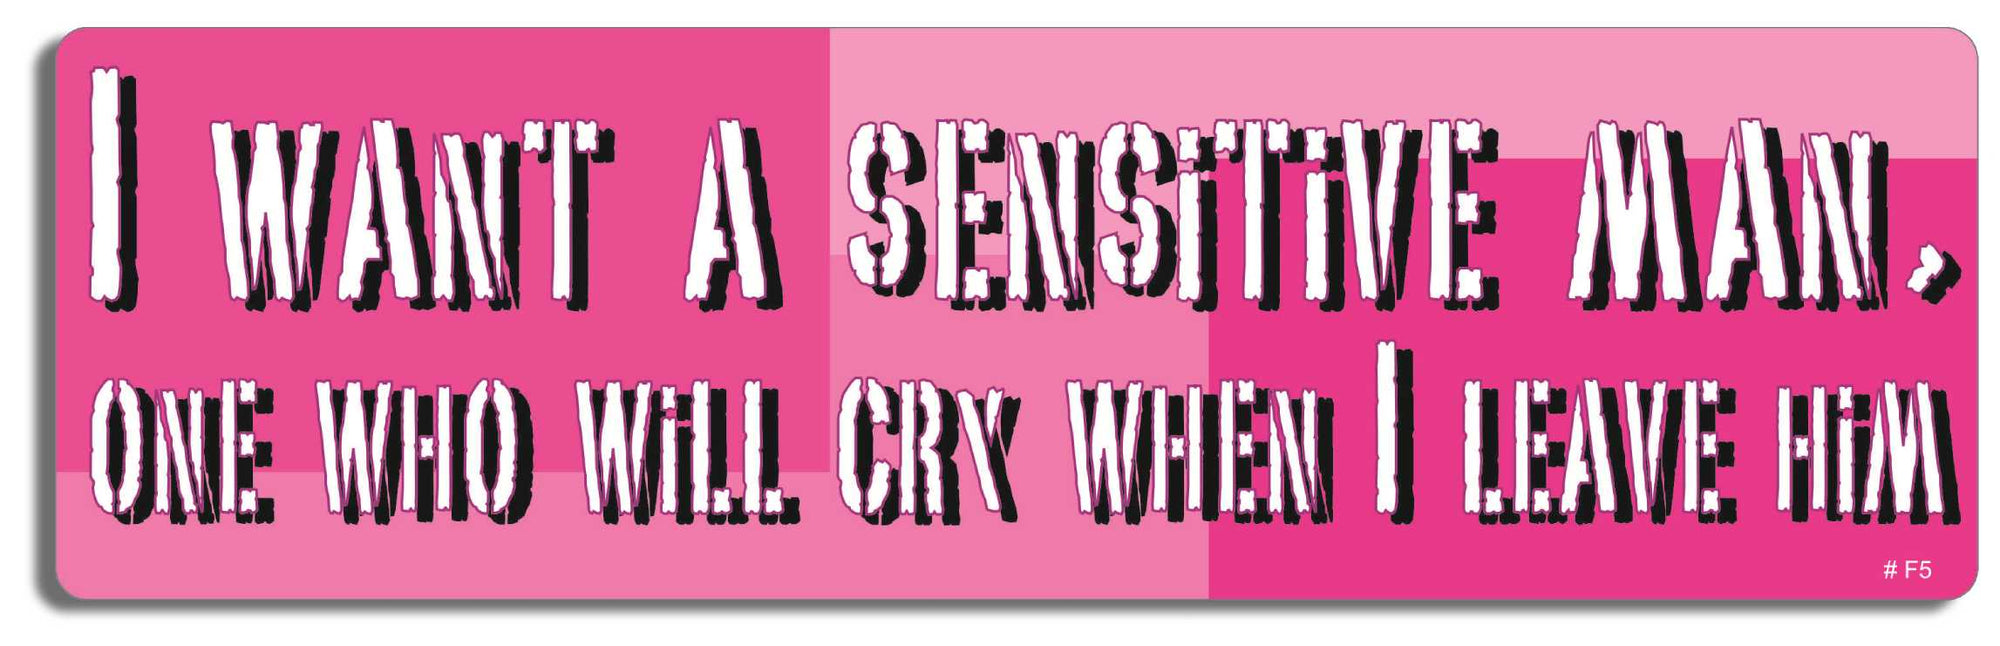 I want a sensitive man, one who will cry when I leave him - 3" x 10" Bumper Sticker--Car Magnet- -  Decal Bumper Sticker-funny Bumper Sticker Car Magnet I want a sensitive man, one who will-  Decal for carsMen